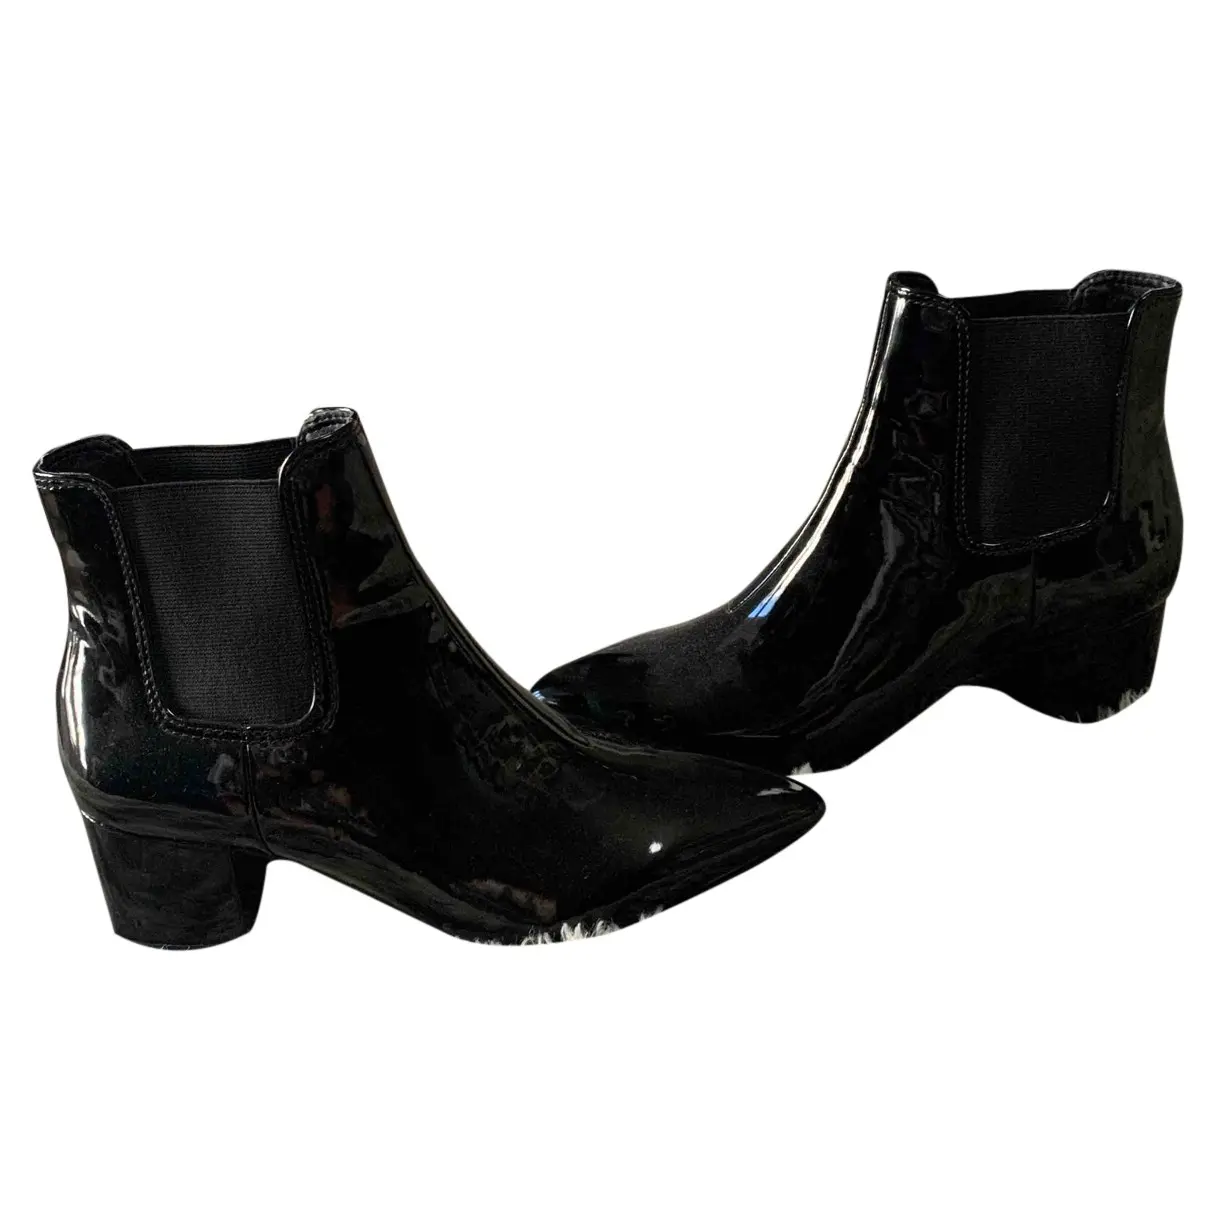 Patent leather ankle boots Steve Madden